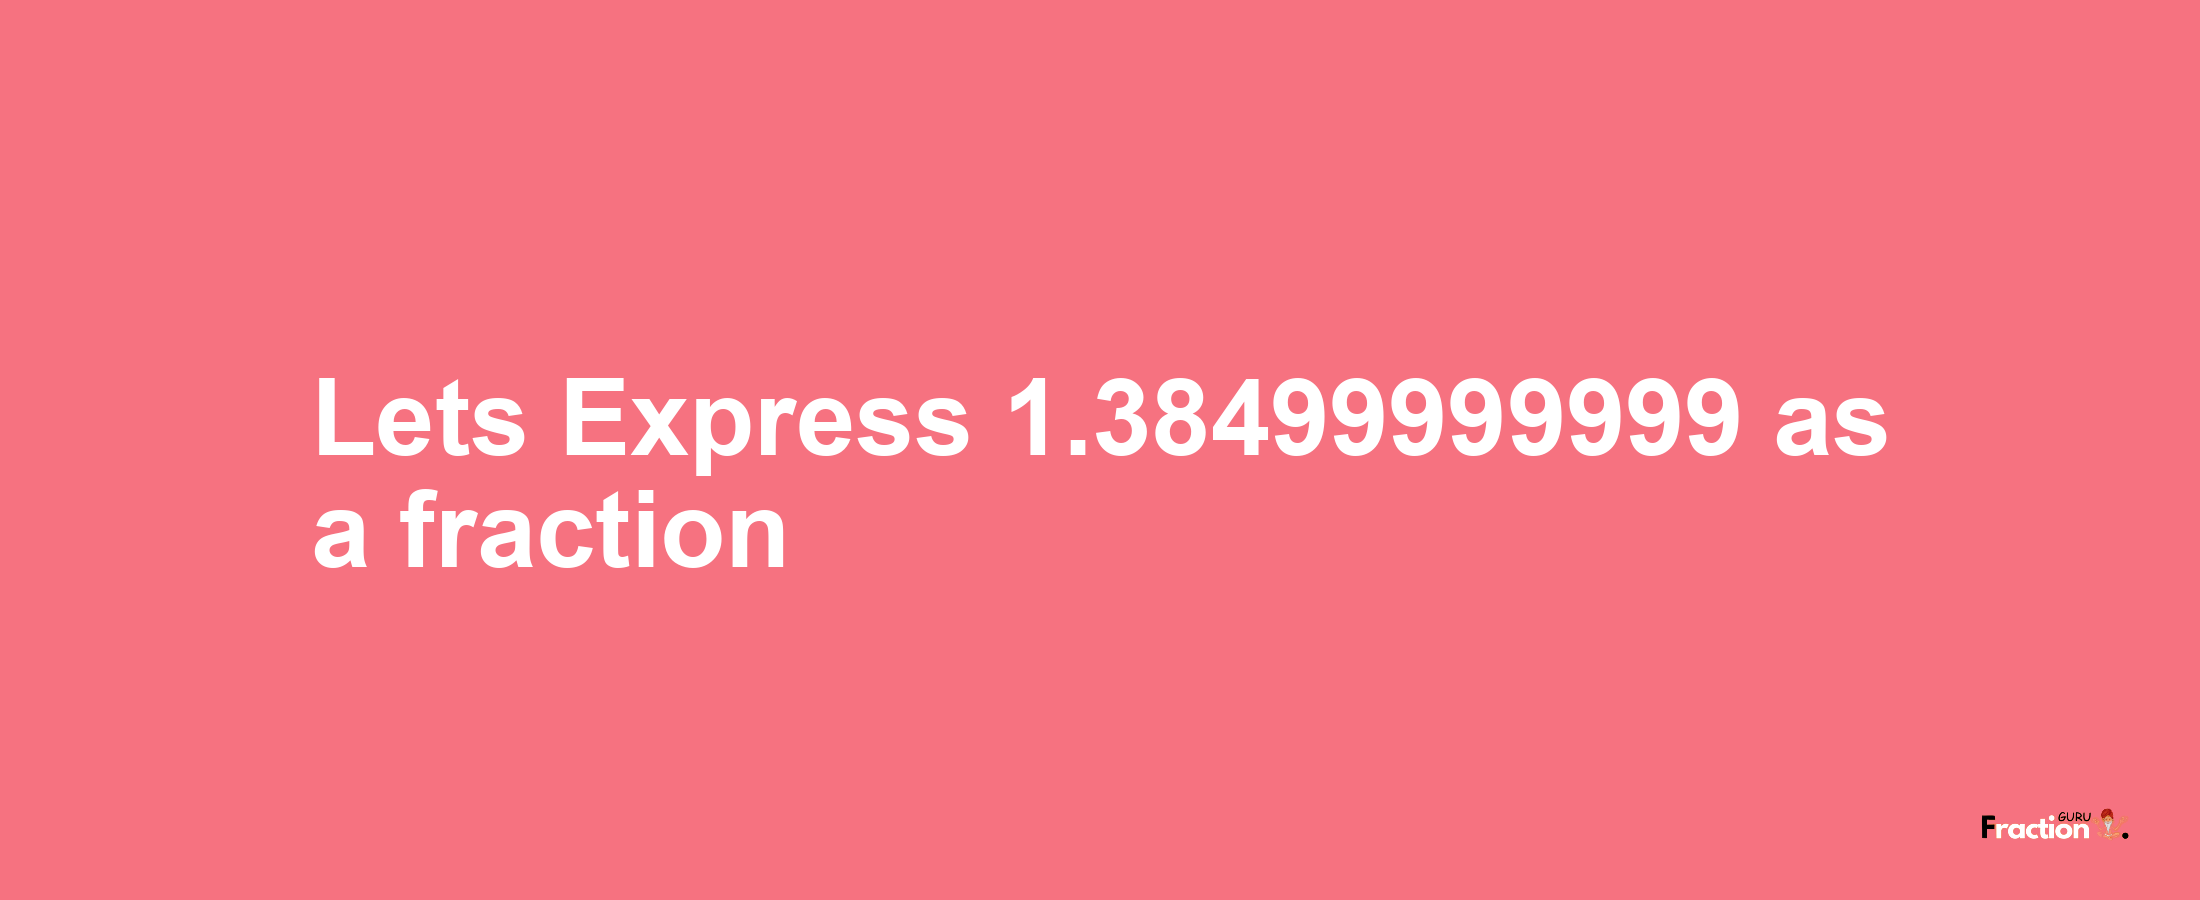 Lets Express 1.38499999999 as afraction